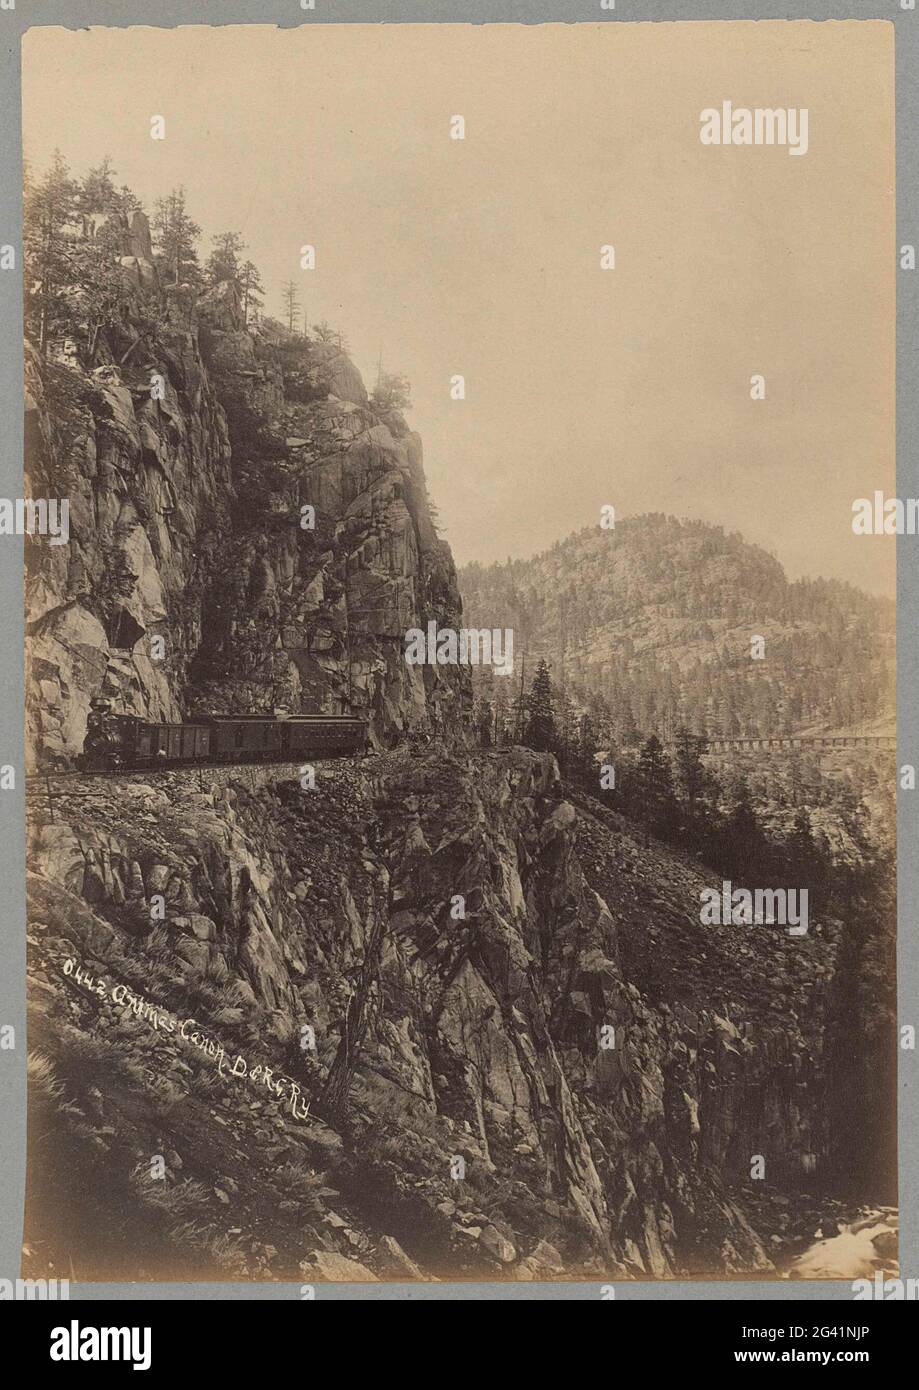 Train from the D. & R.G.RY in the Animas Canyon in Colorado with a railway via duct on the right; Animas Canon, D. & R.G.RY. . Stock Photo